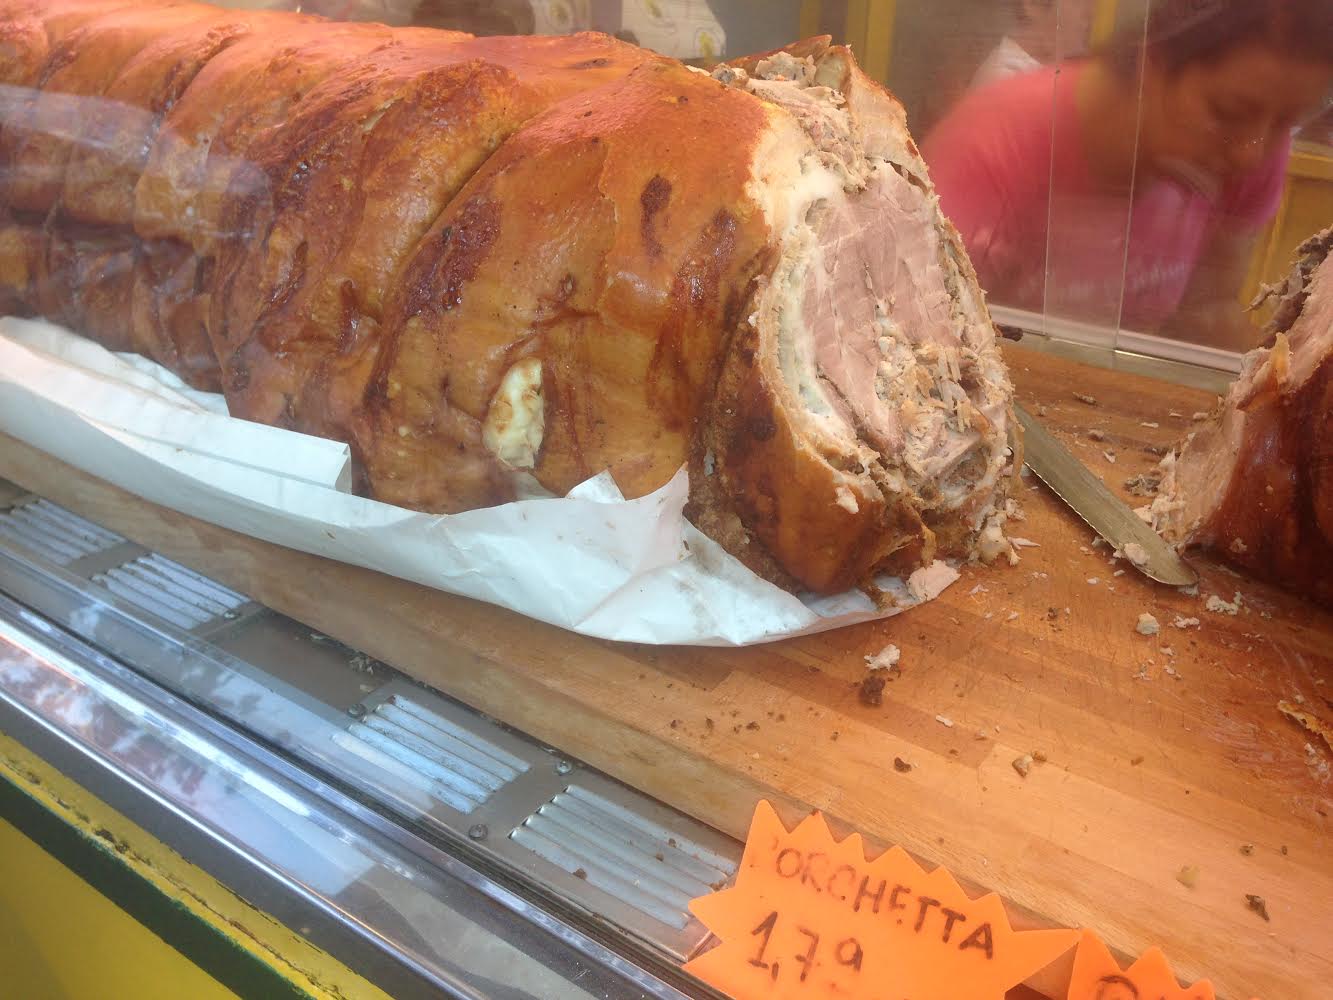 Throughout Frascati and other towns, you will find porchetta for sale in streetvans.